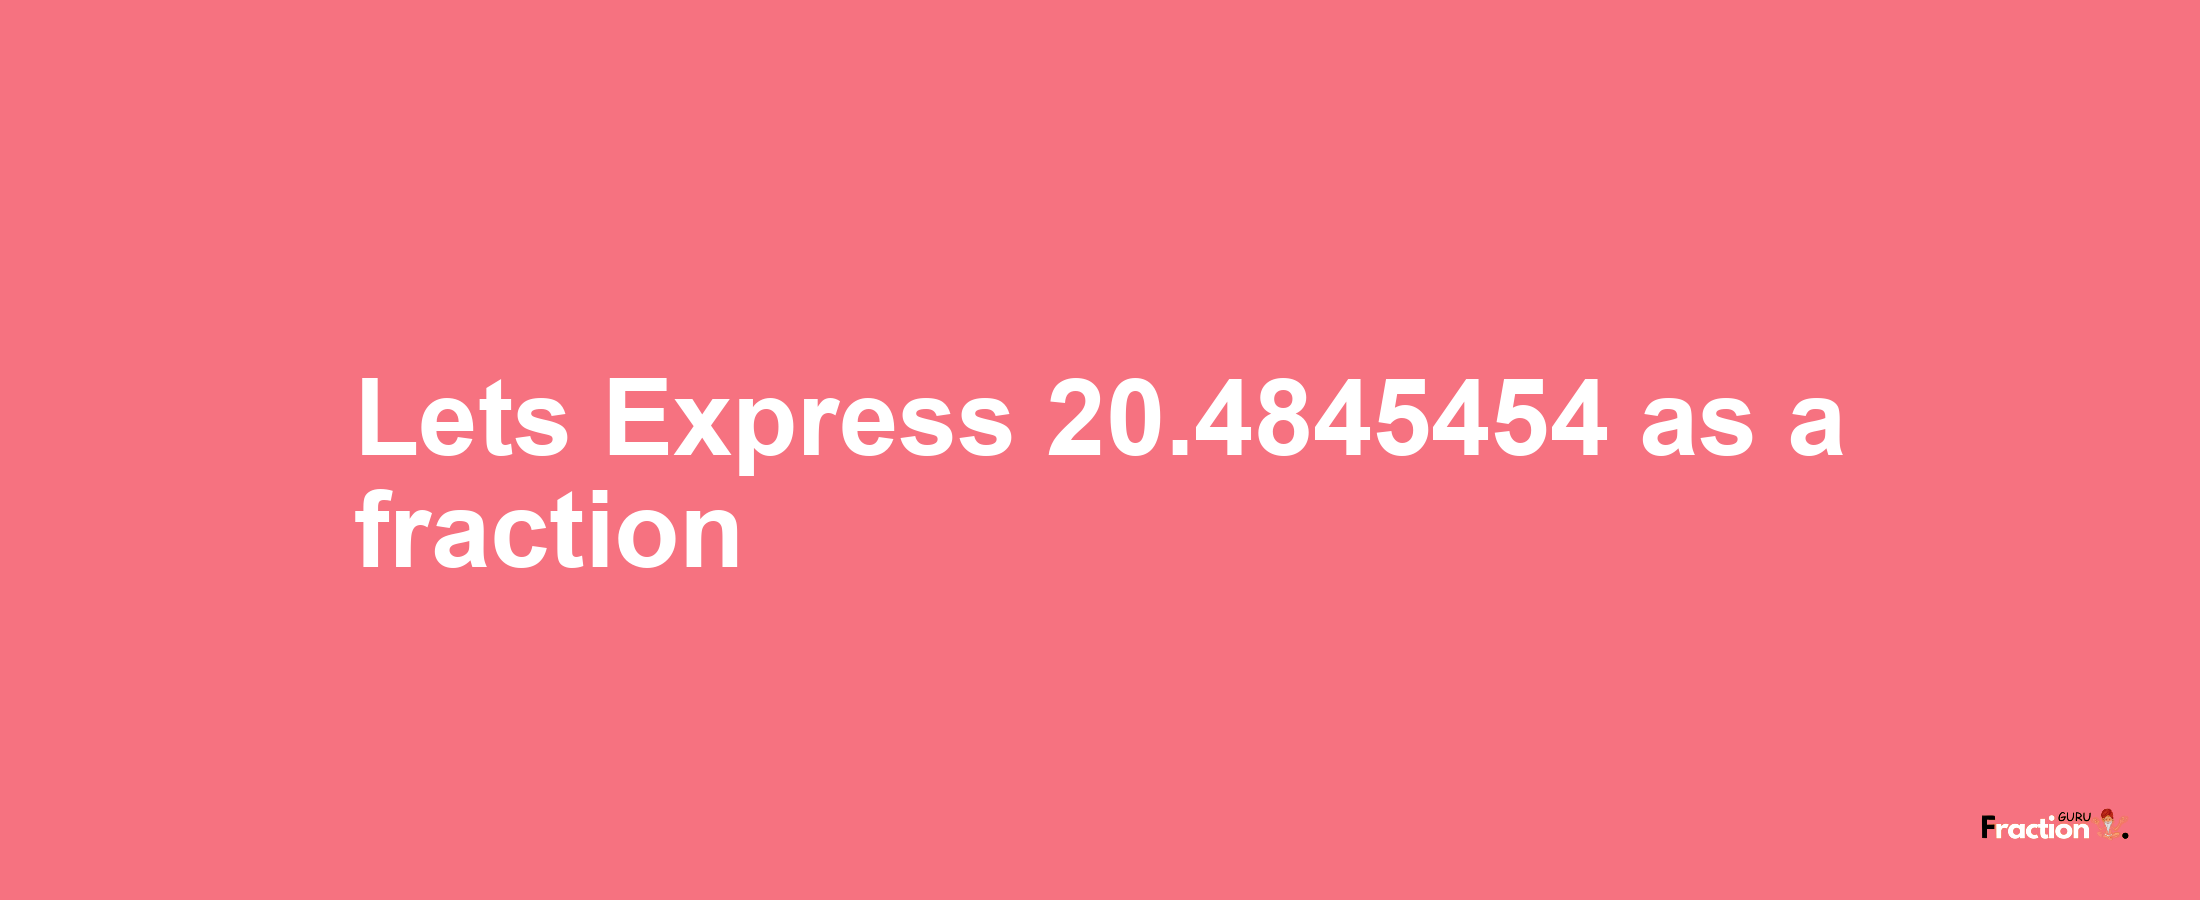 Lets Express 20.4845454 as afraction